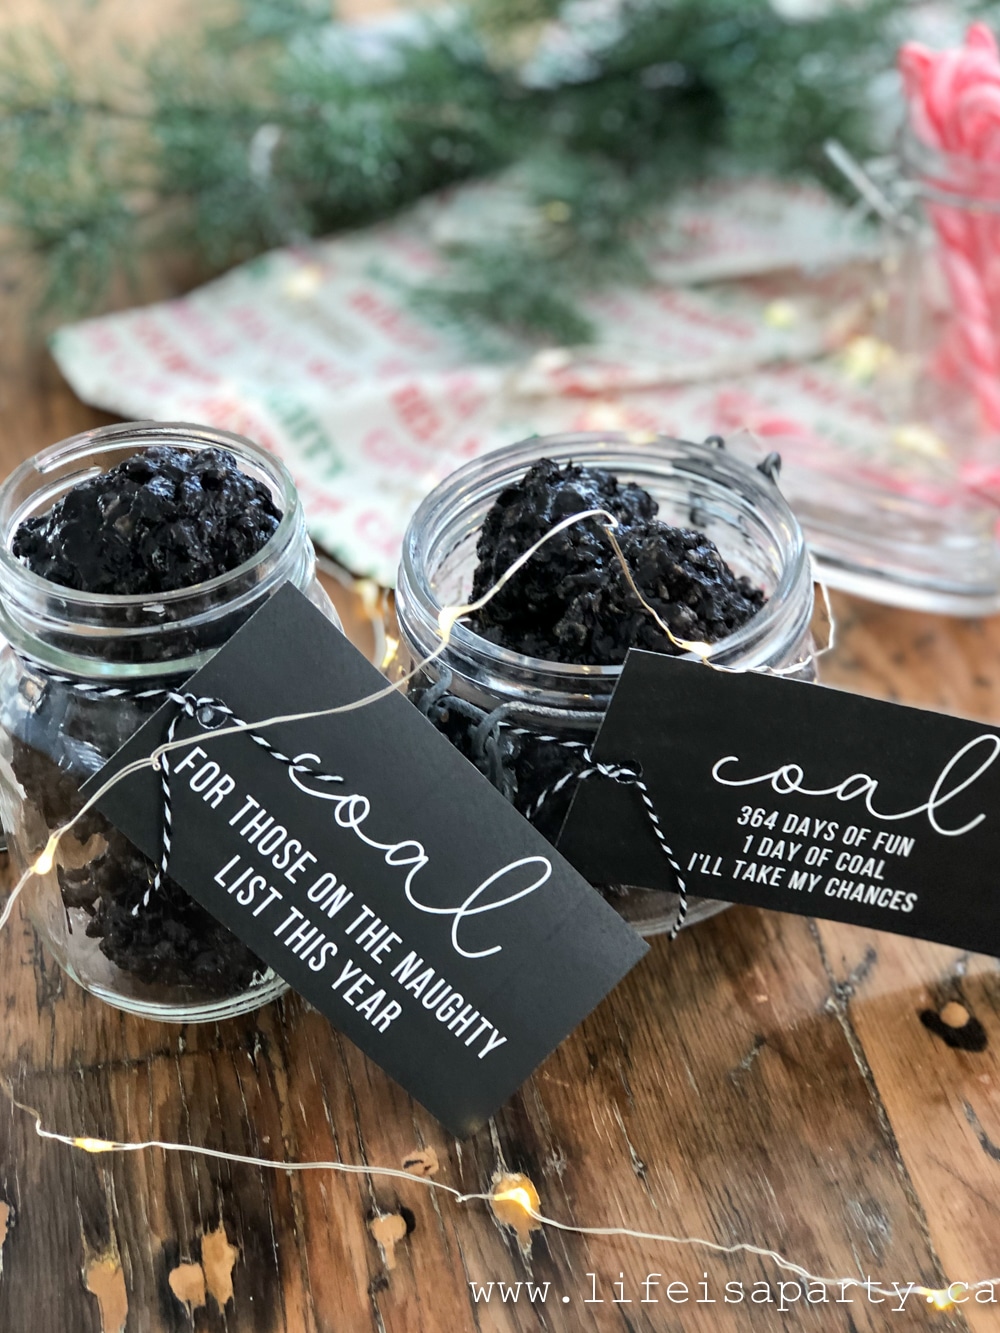 Coal in your stocking cookies